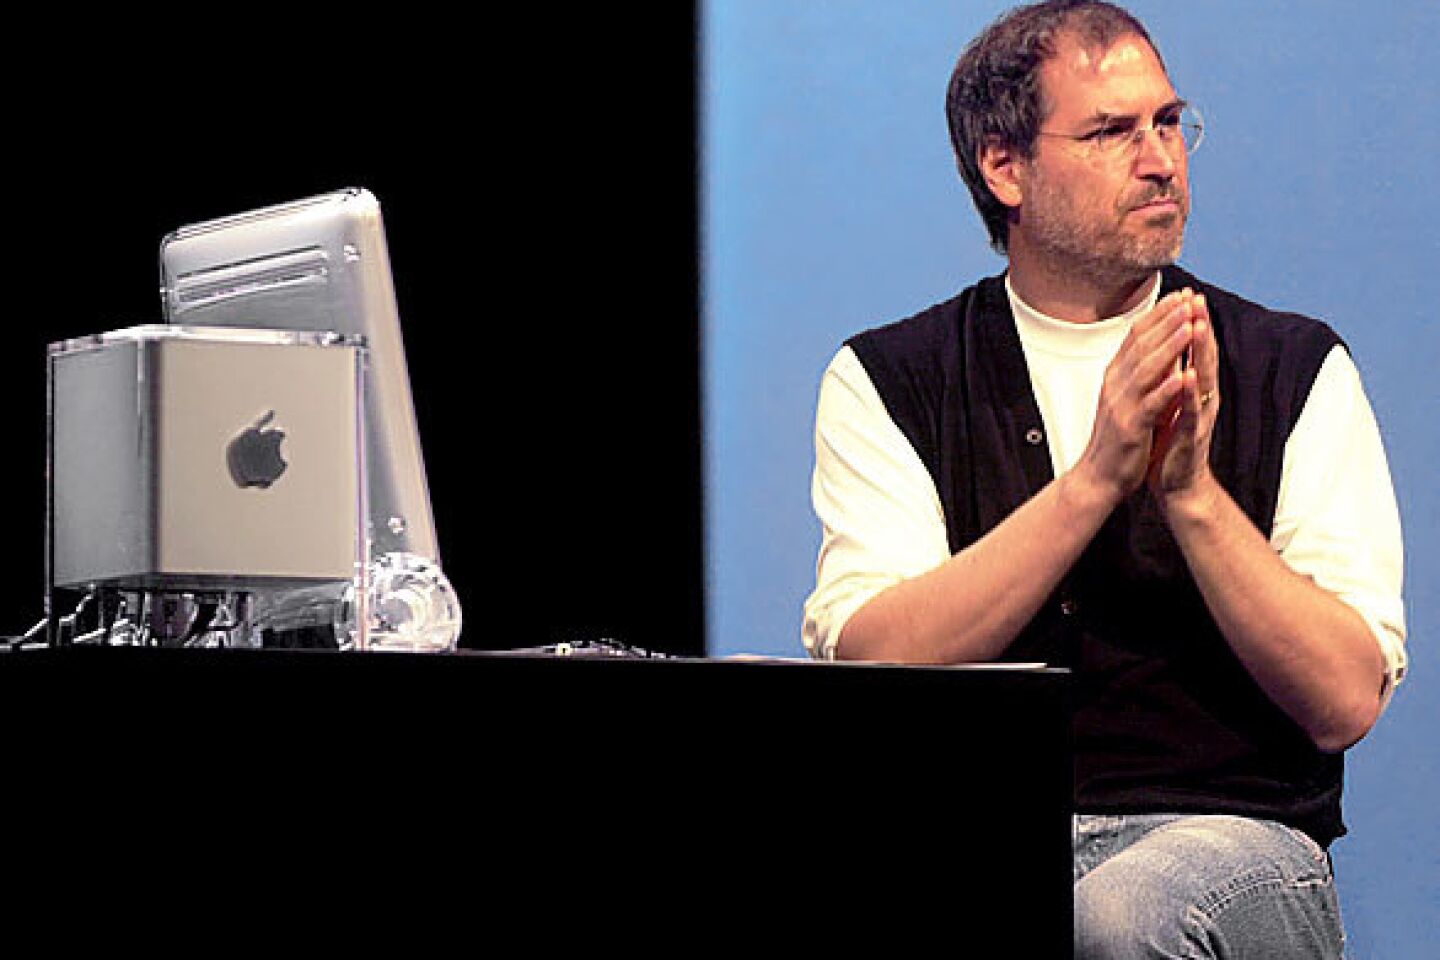 Jobs demonstrates Apple's new flat screen and G4 Cube at the Seybold Conference & Exposition. He also announced the upcoming launch of the OSX operating system.